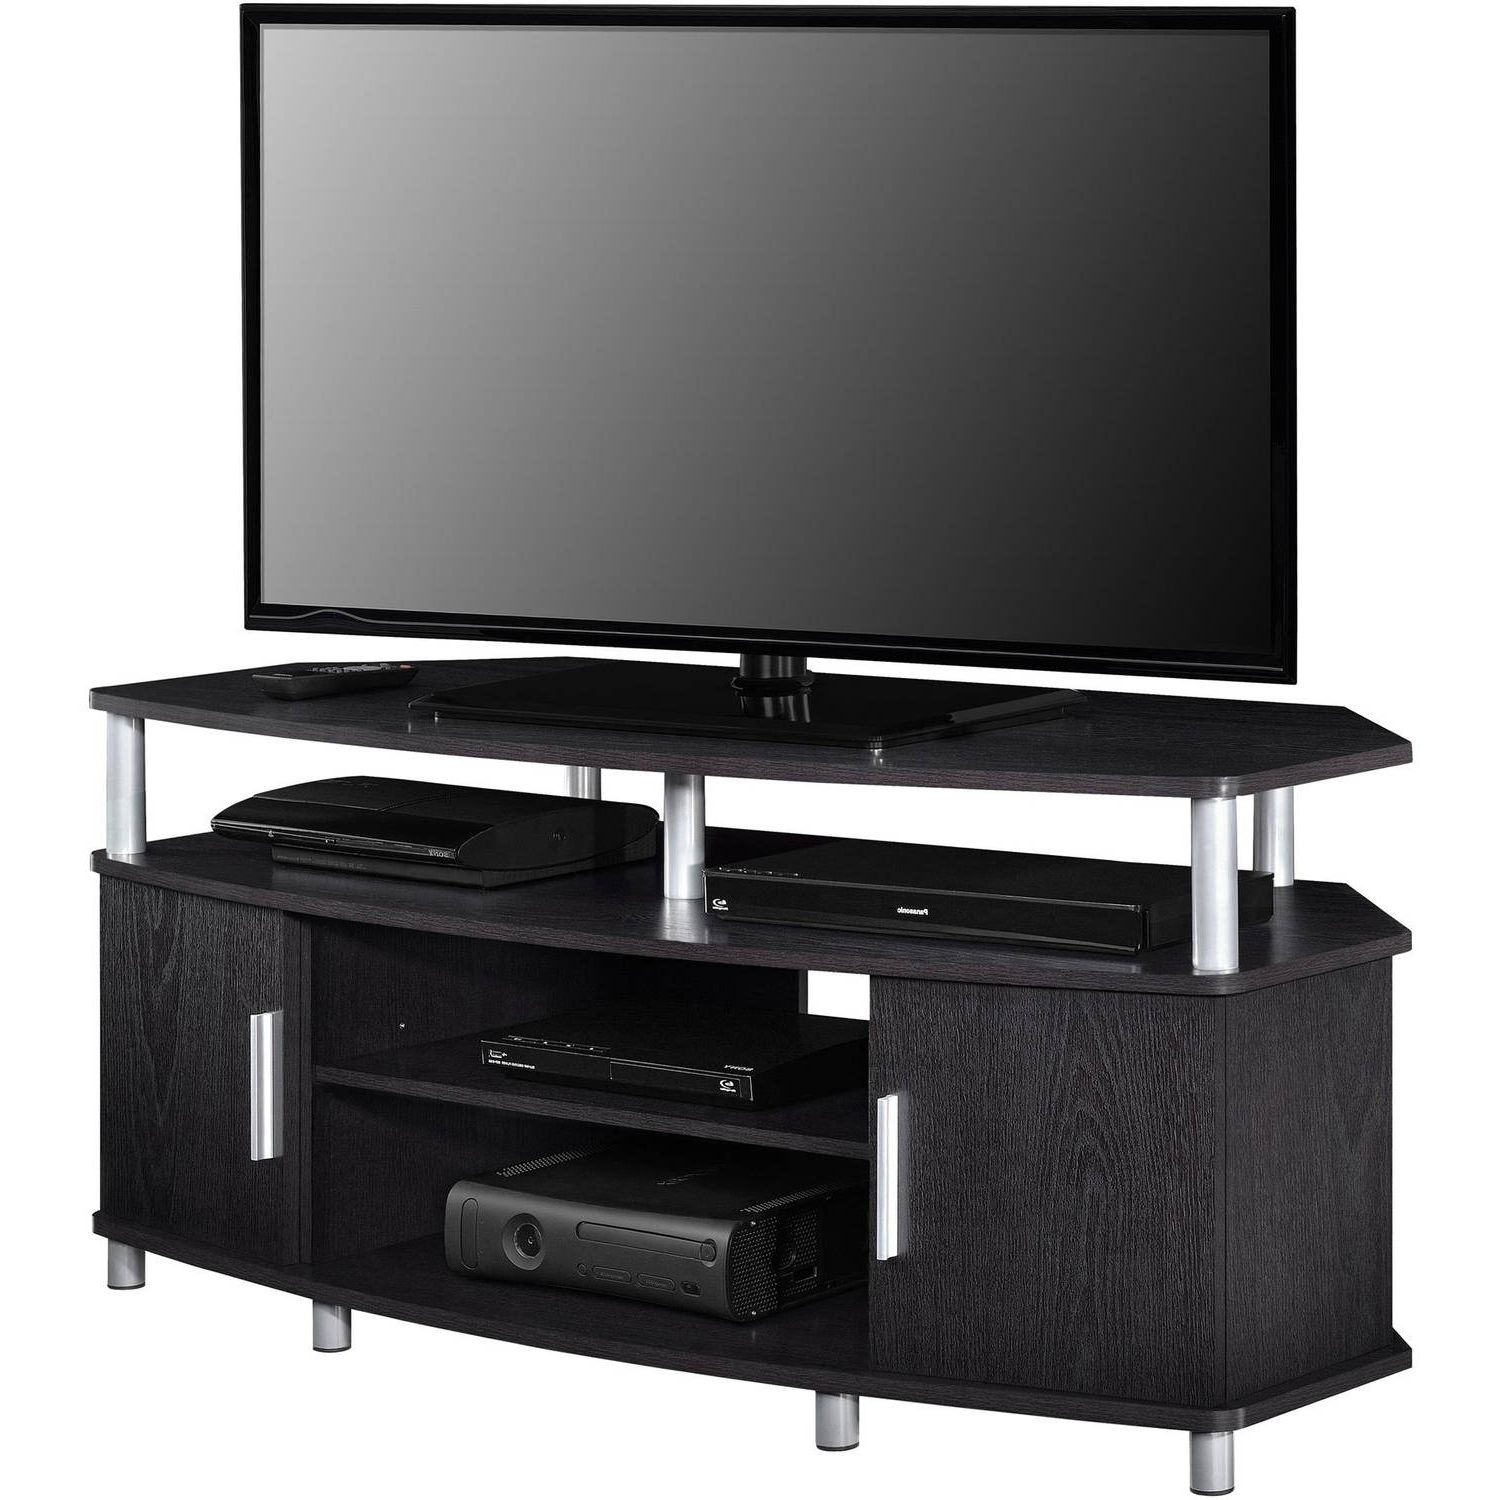 New Tv Stands For Flat Screens 55 Media Console Black Corner Living Inside Preferred Corner Tv Cabinets For Flat Screen (View 7 of 20)